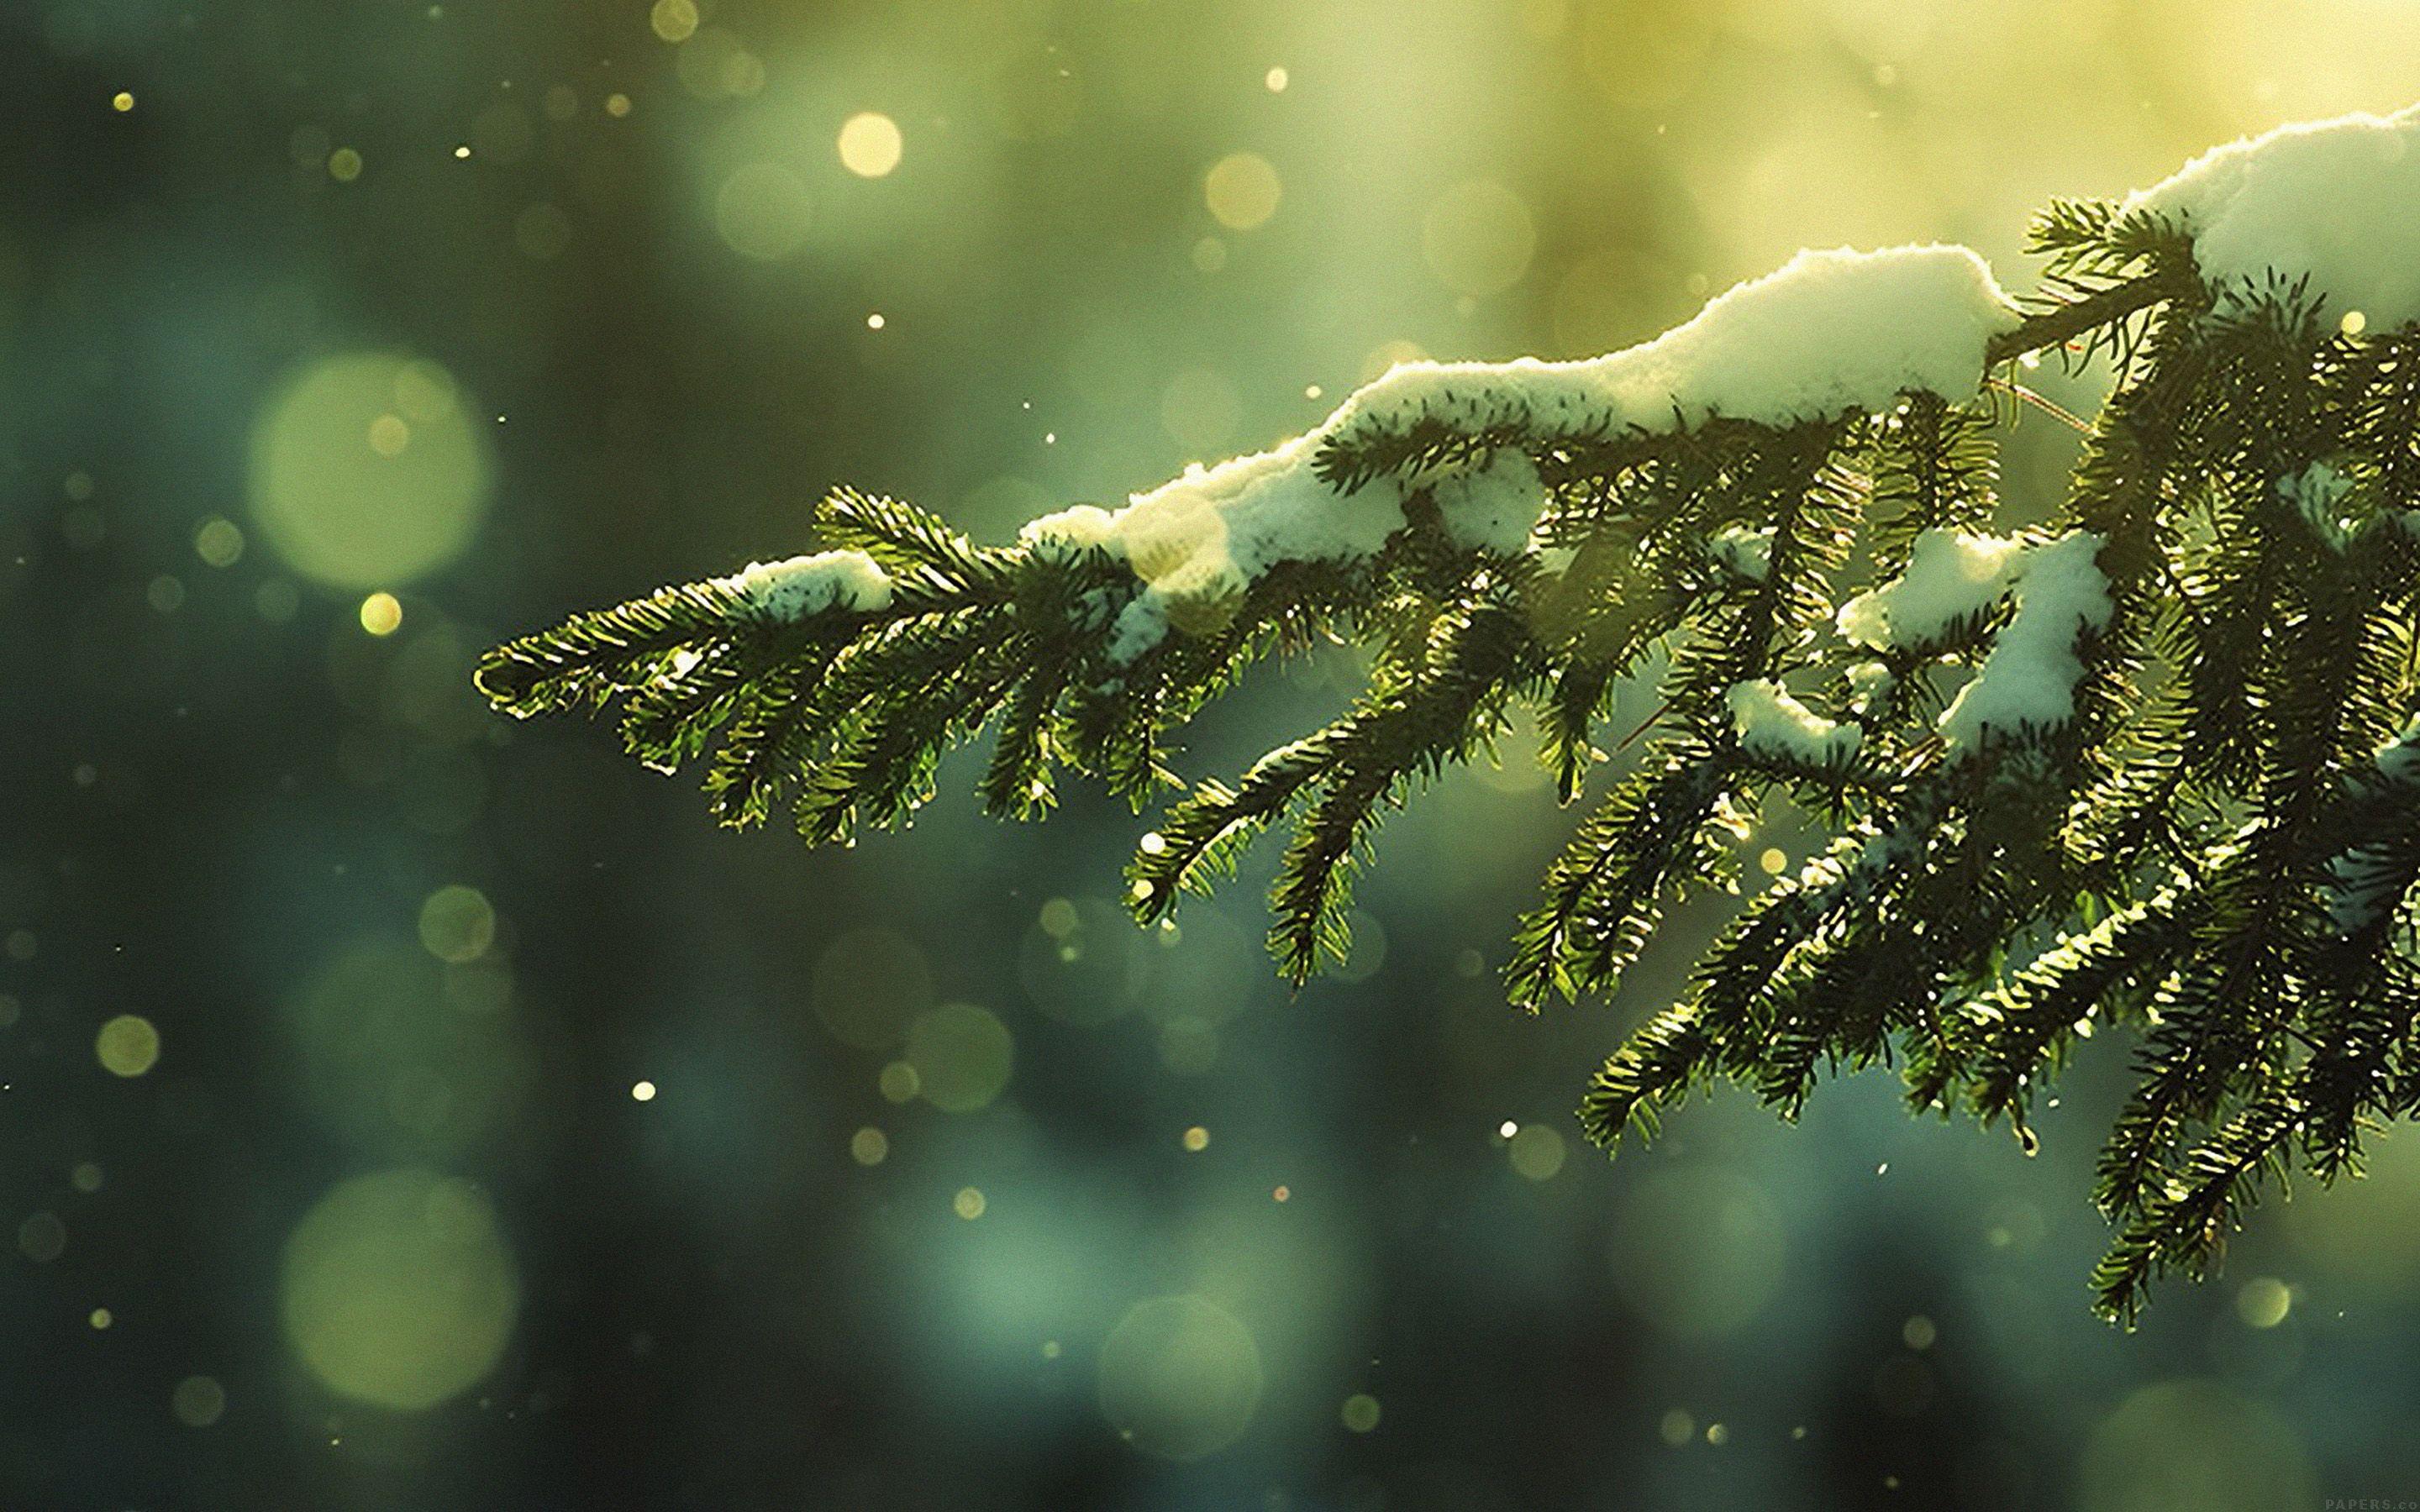 Winter Wallpaper with Snowing Tree for Desktop Background